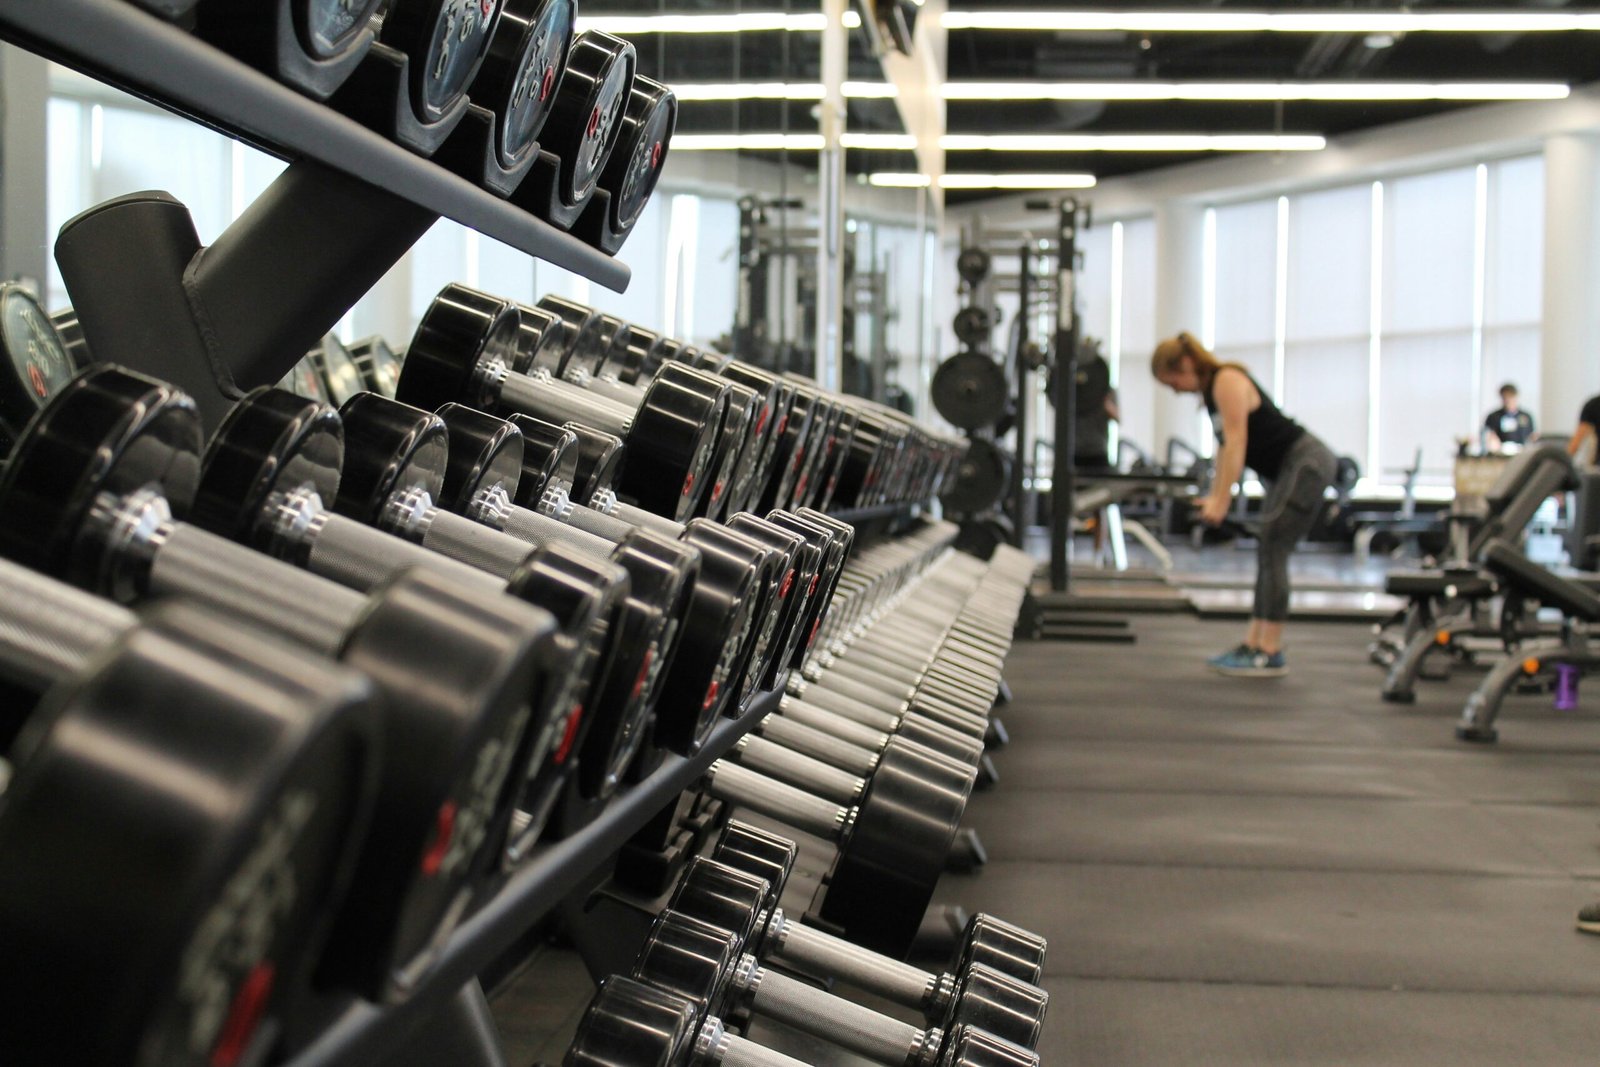 Discover Low-Cost Gym Memberships in Your Area